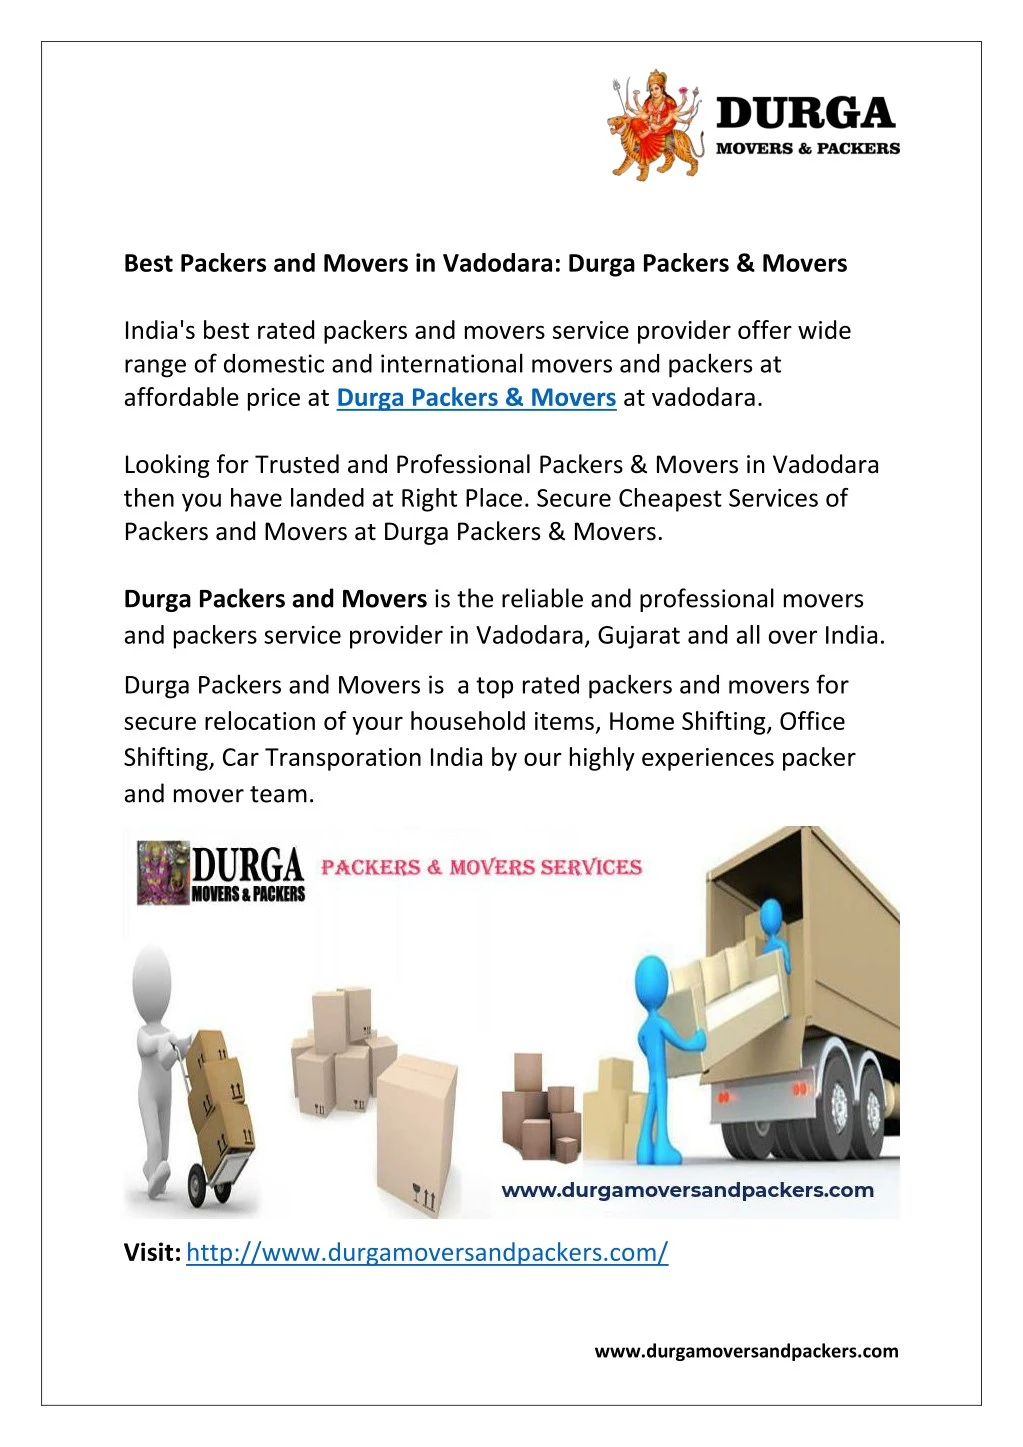 best packers and movers in vadodara durga packers